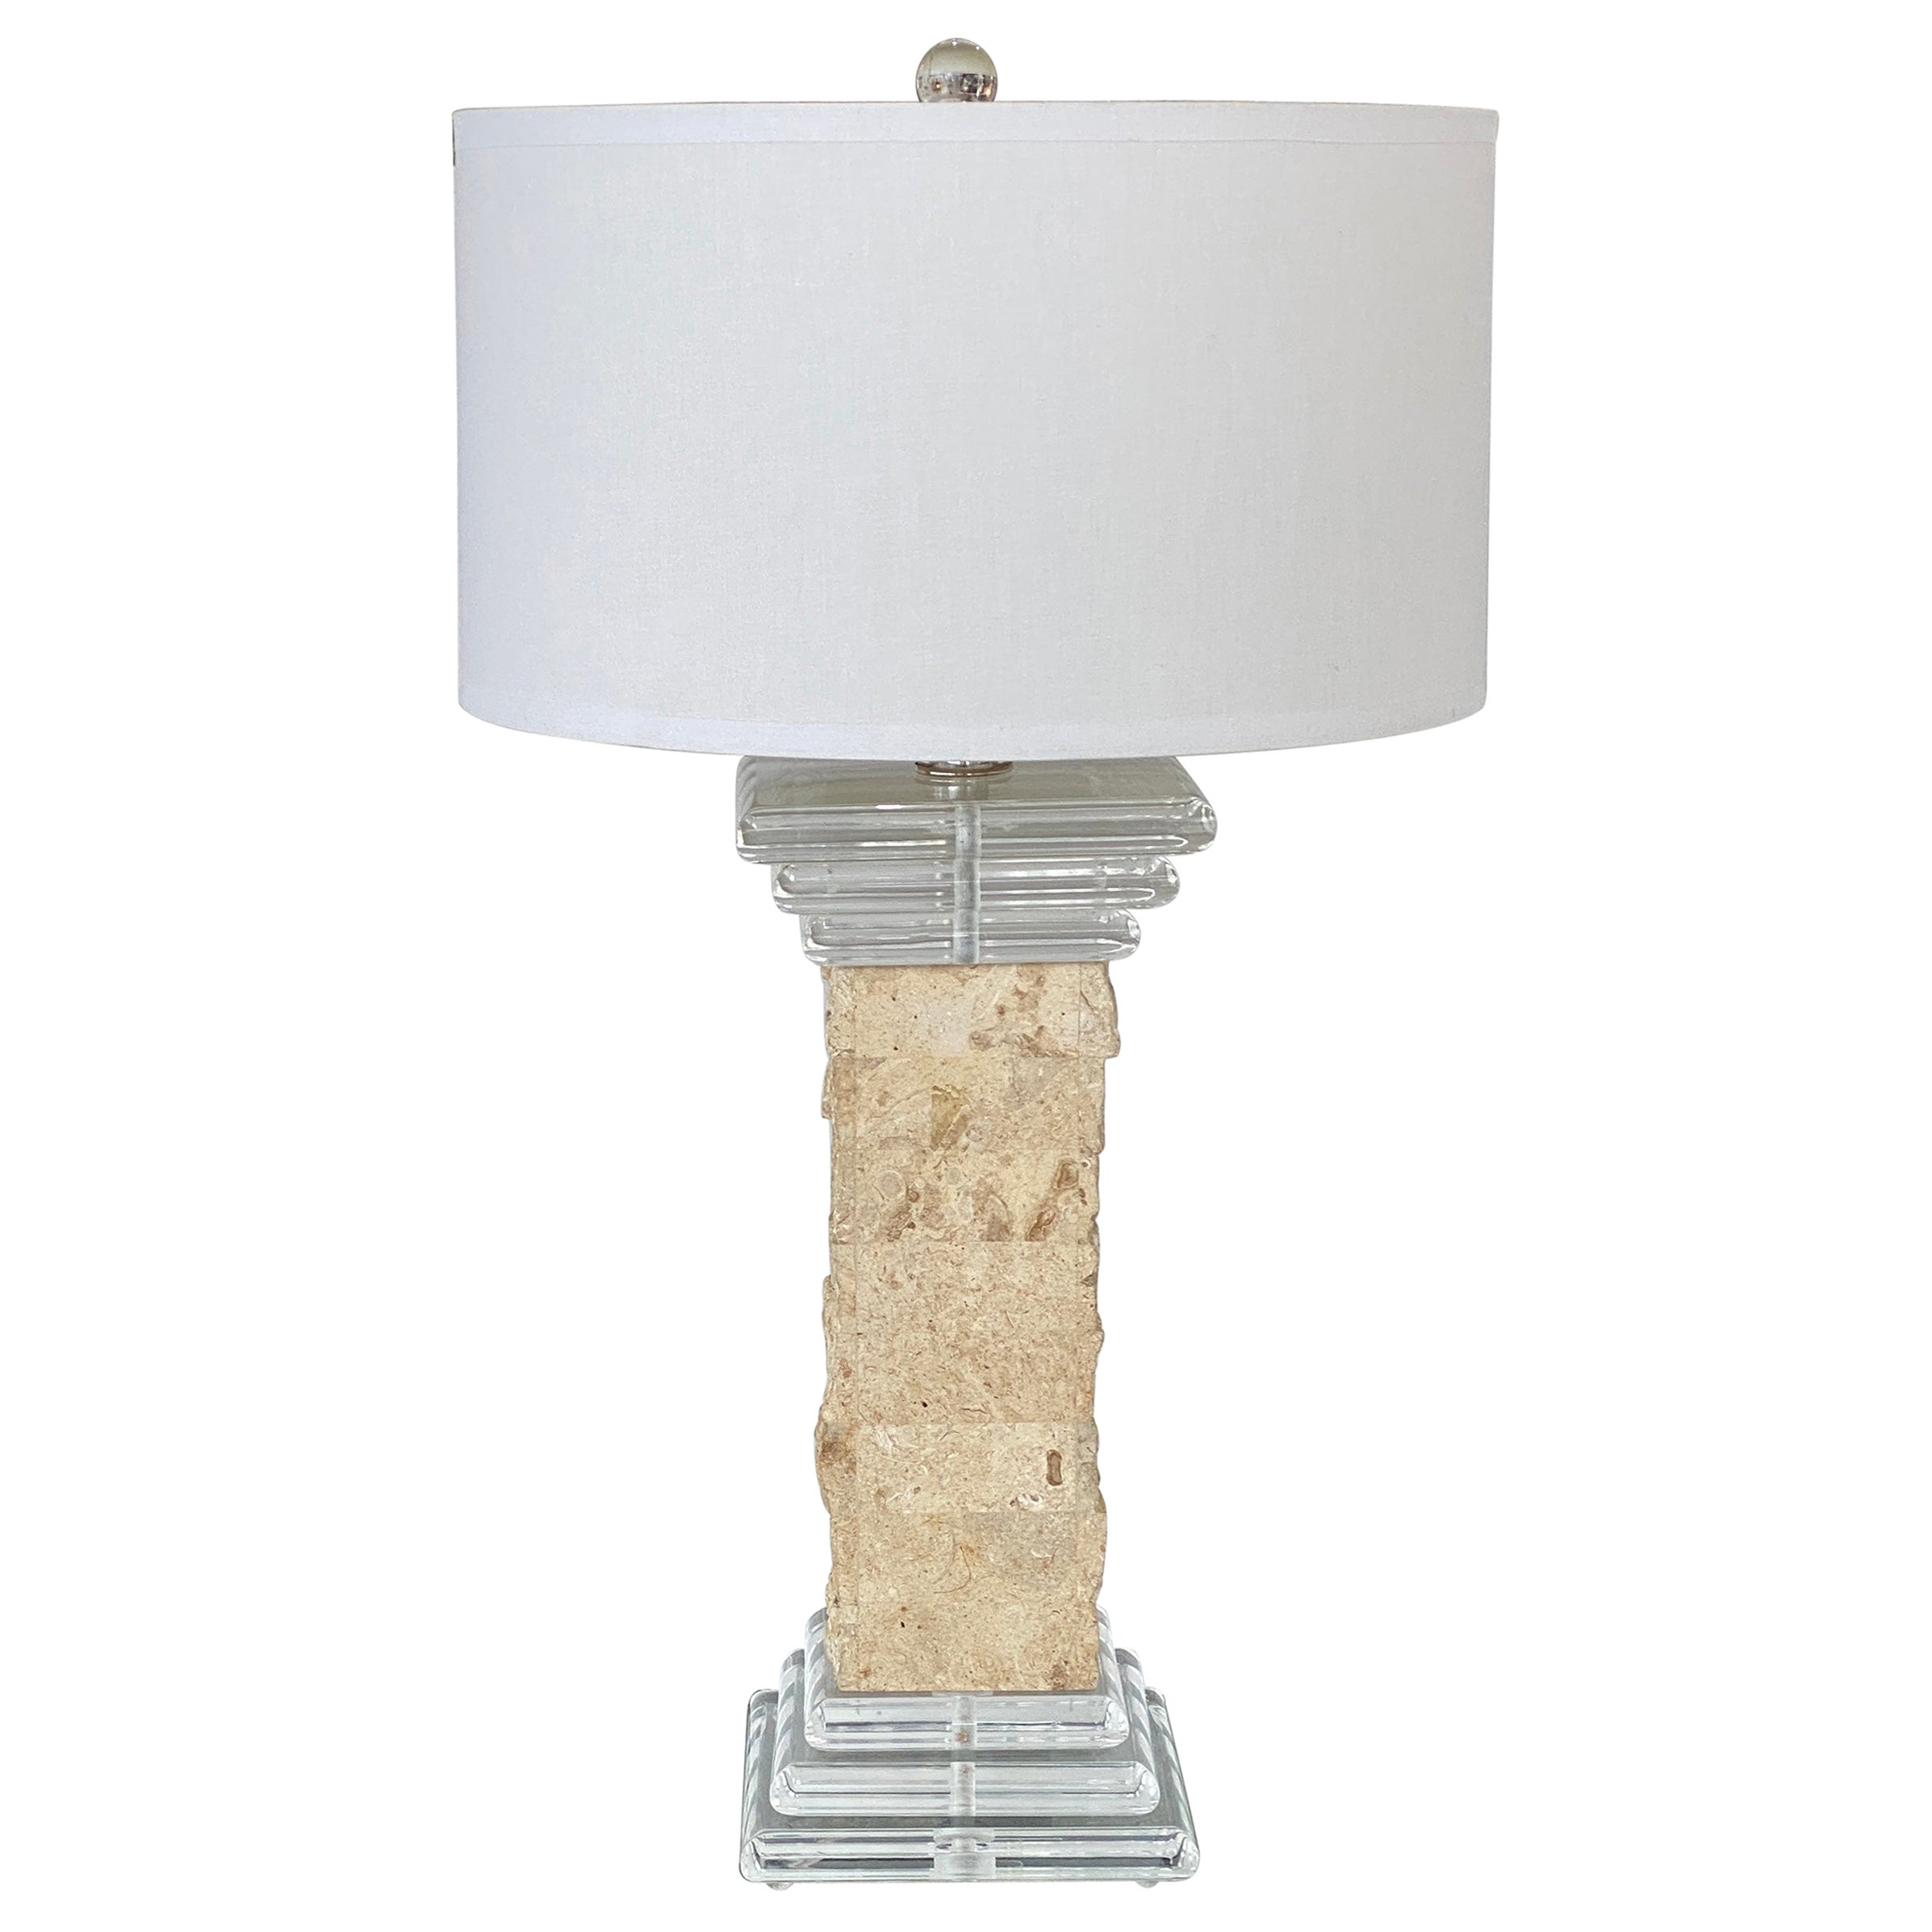 Bauer Lamp Company Travertine and Lucite Table Lamp